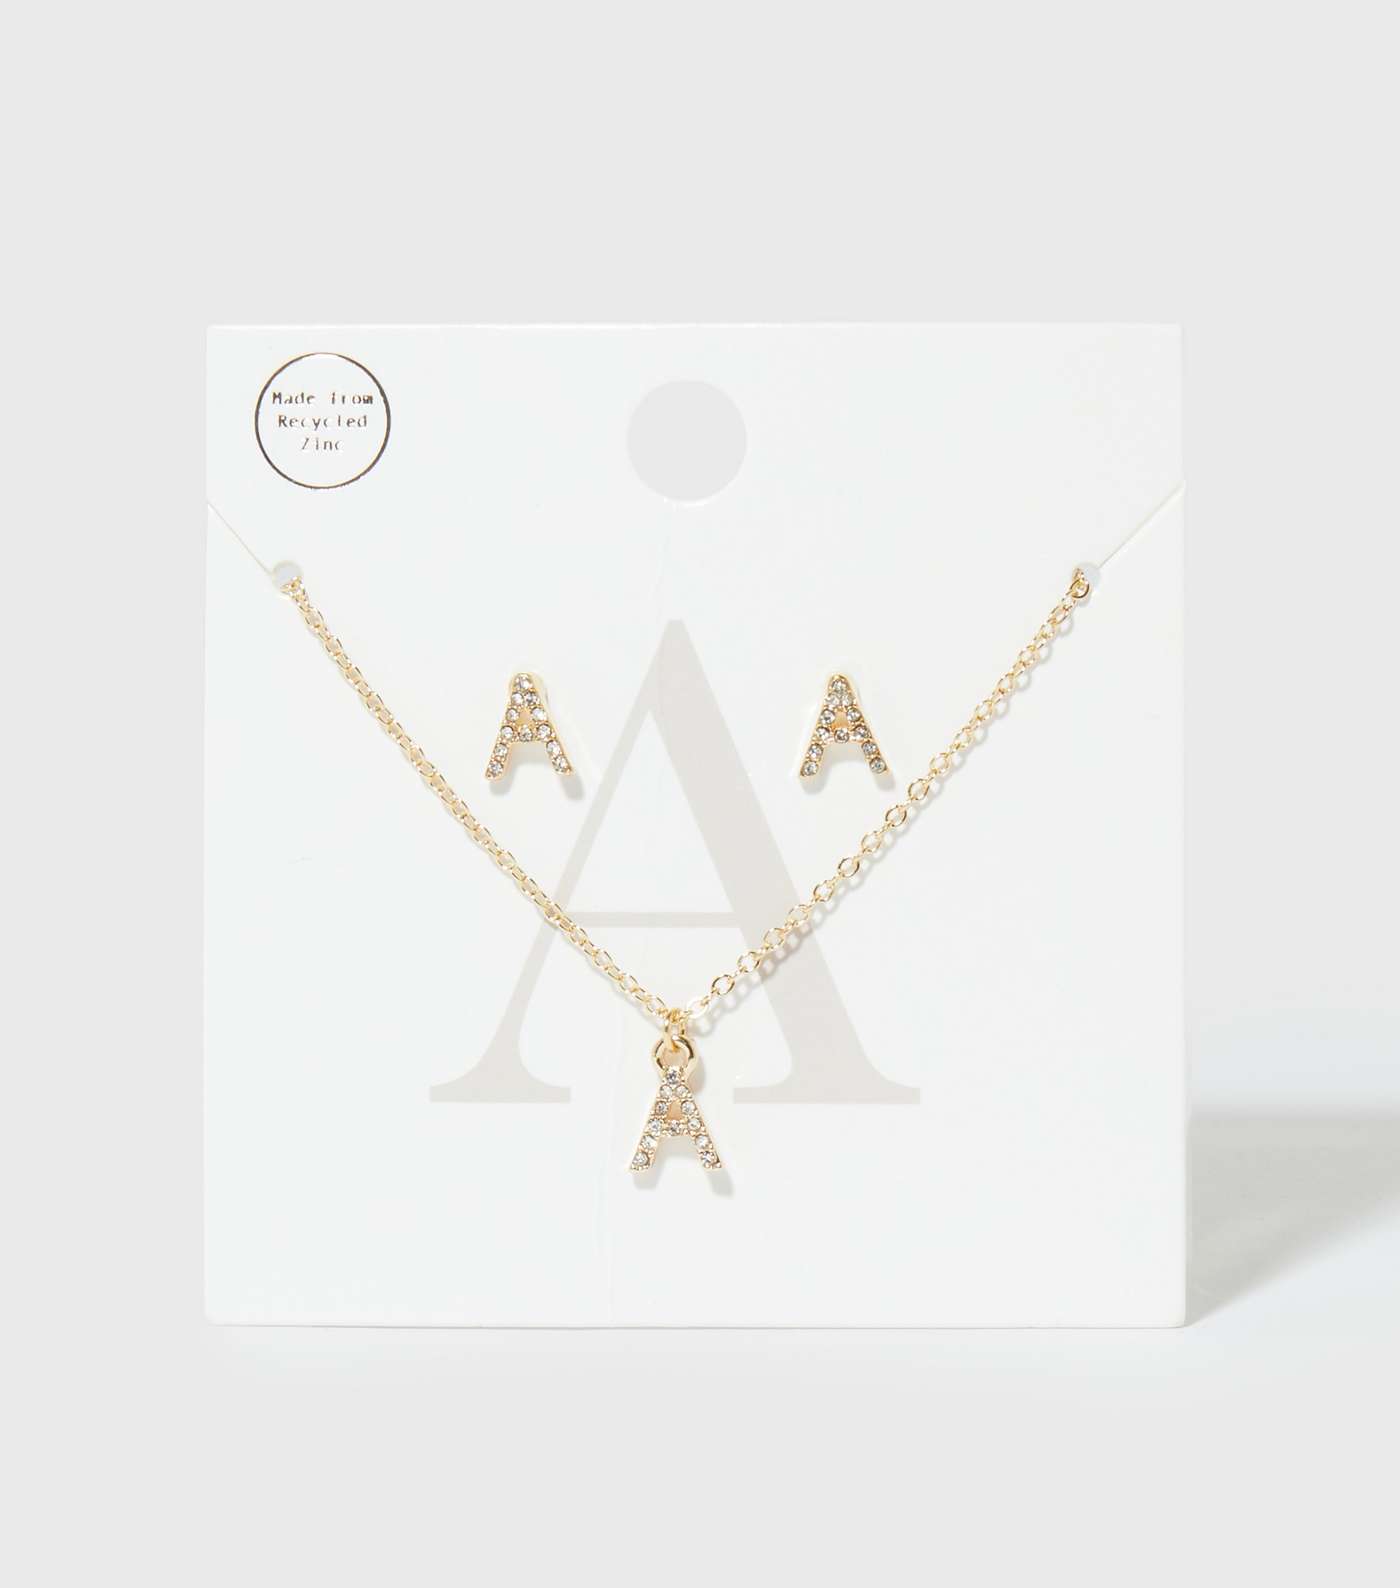 Gold A Initial Earrings and Necklace Gift Set